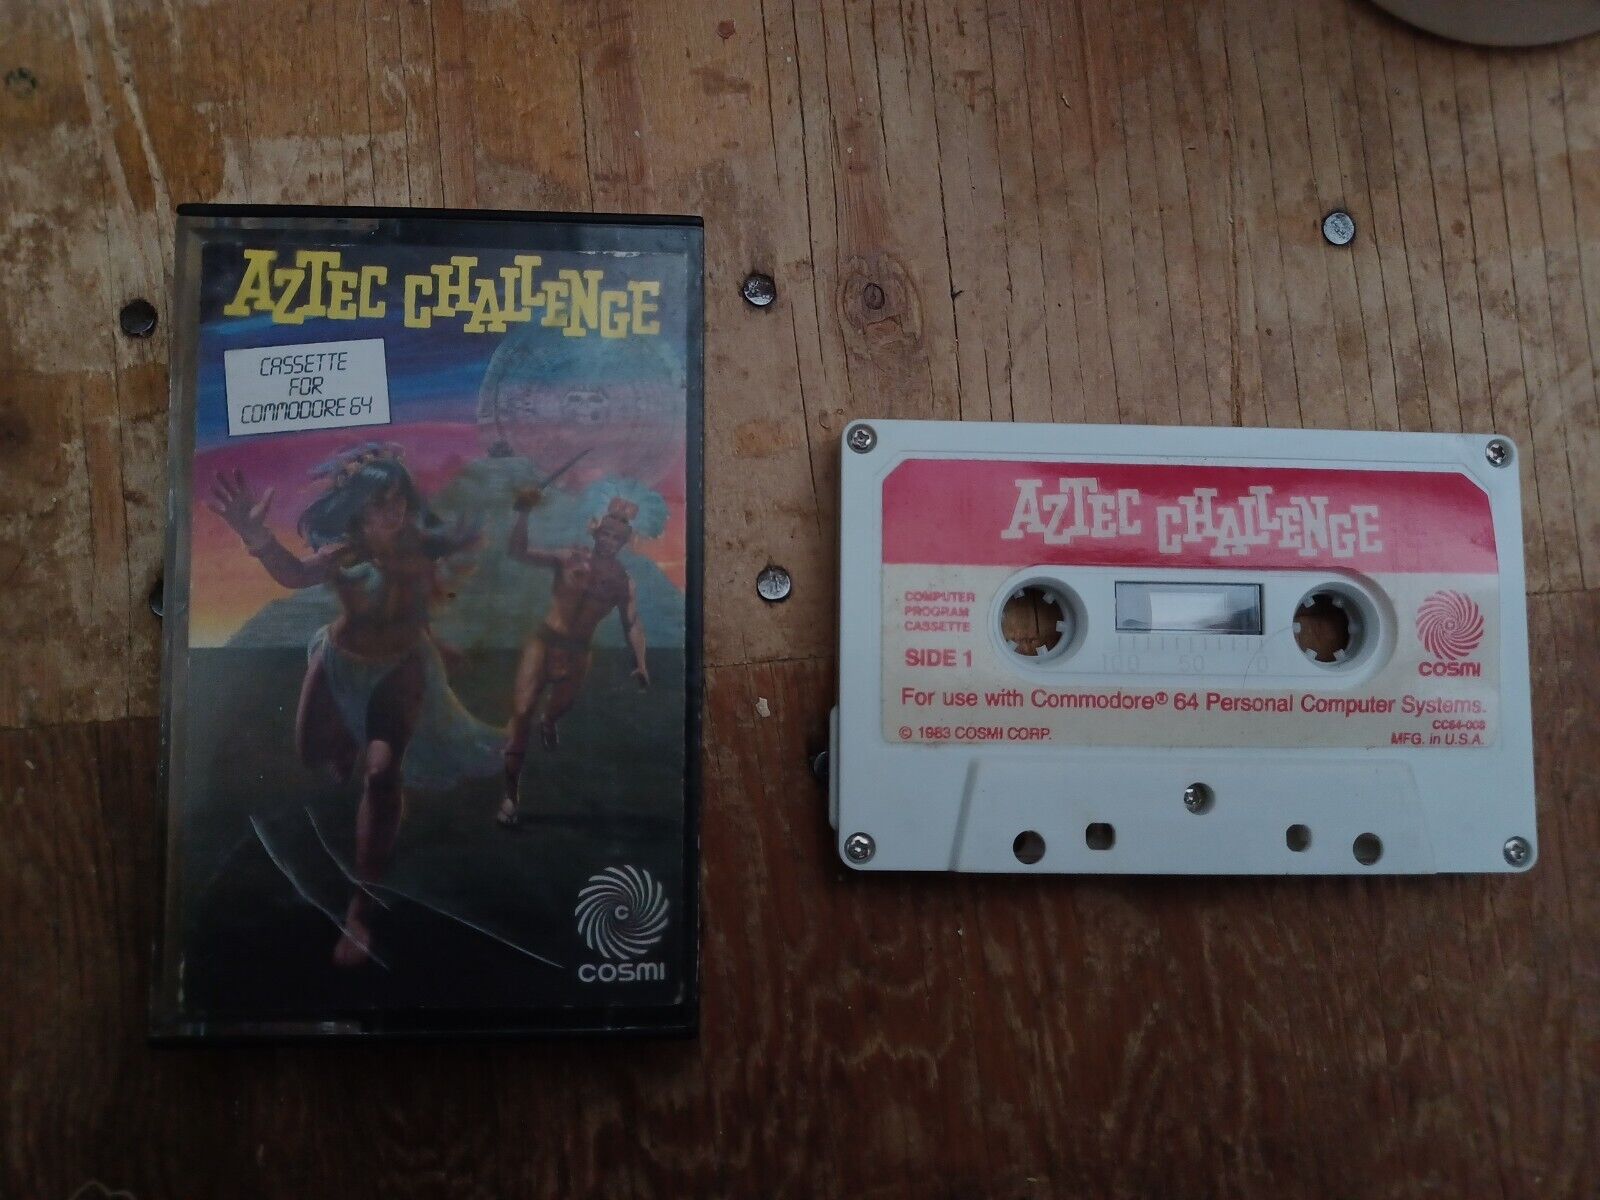 Vintage Commodore 64 128 AZTEC CHALLENGE software - Tested and works